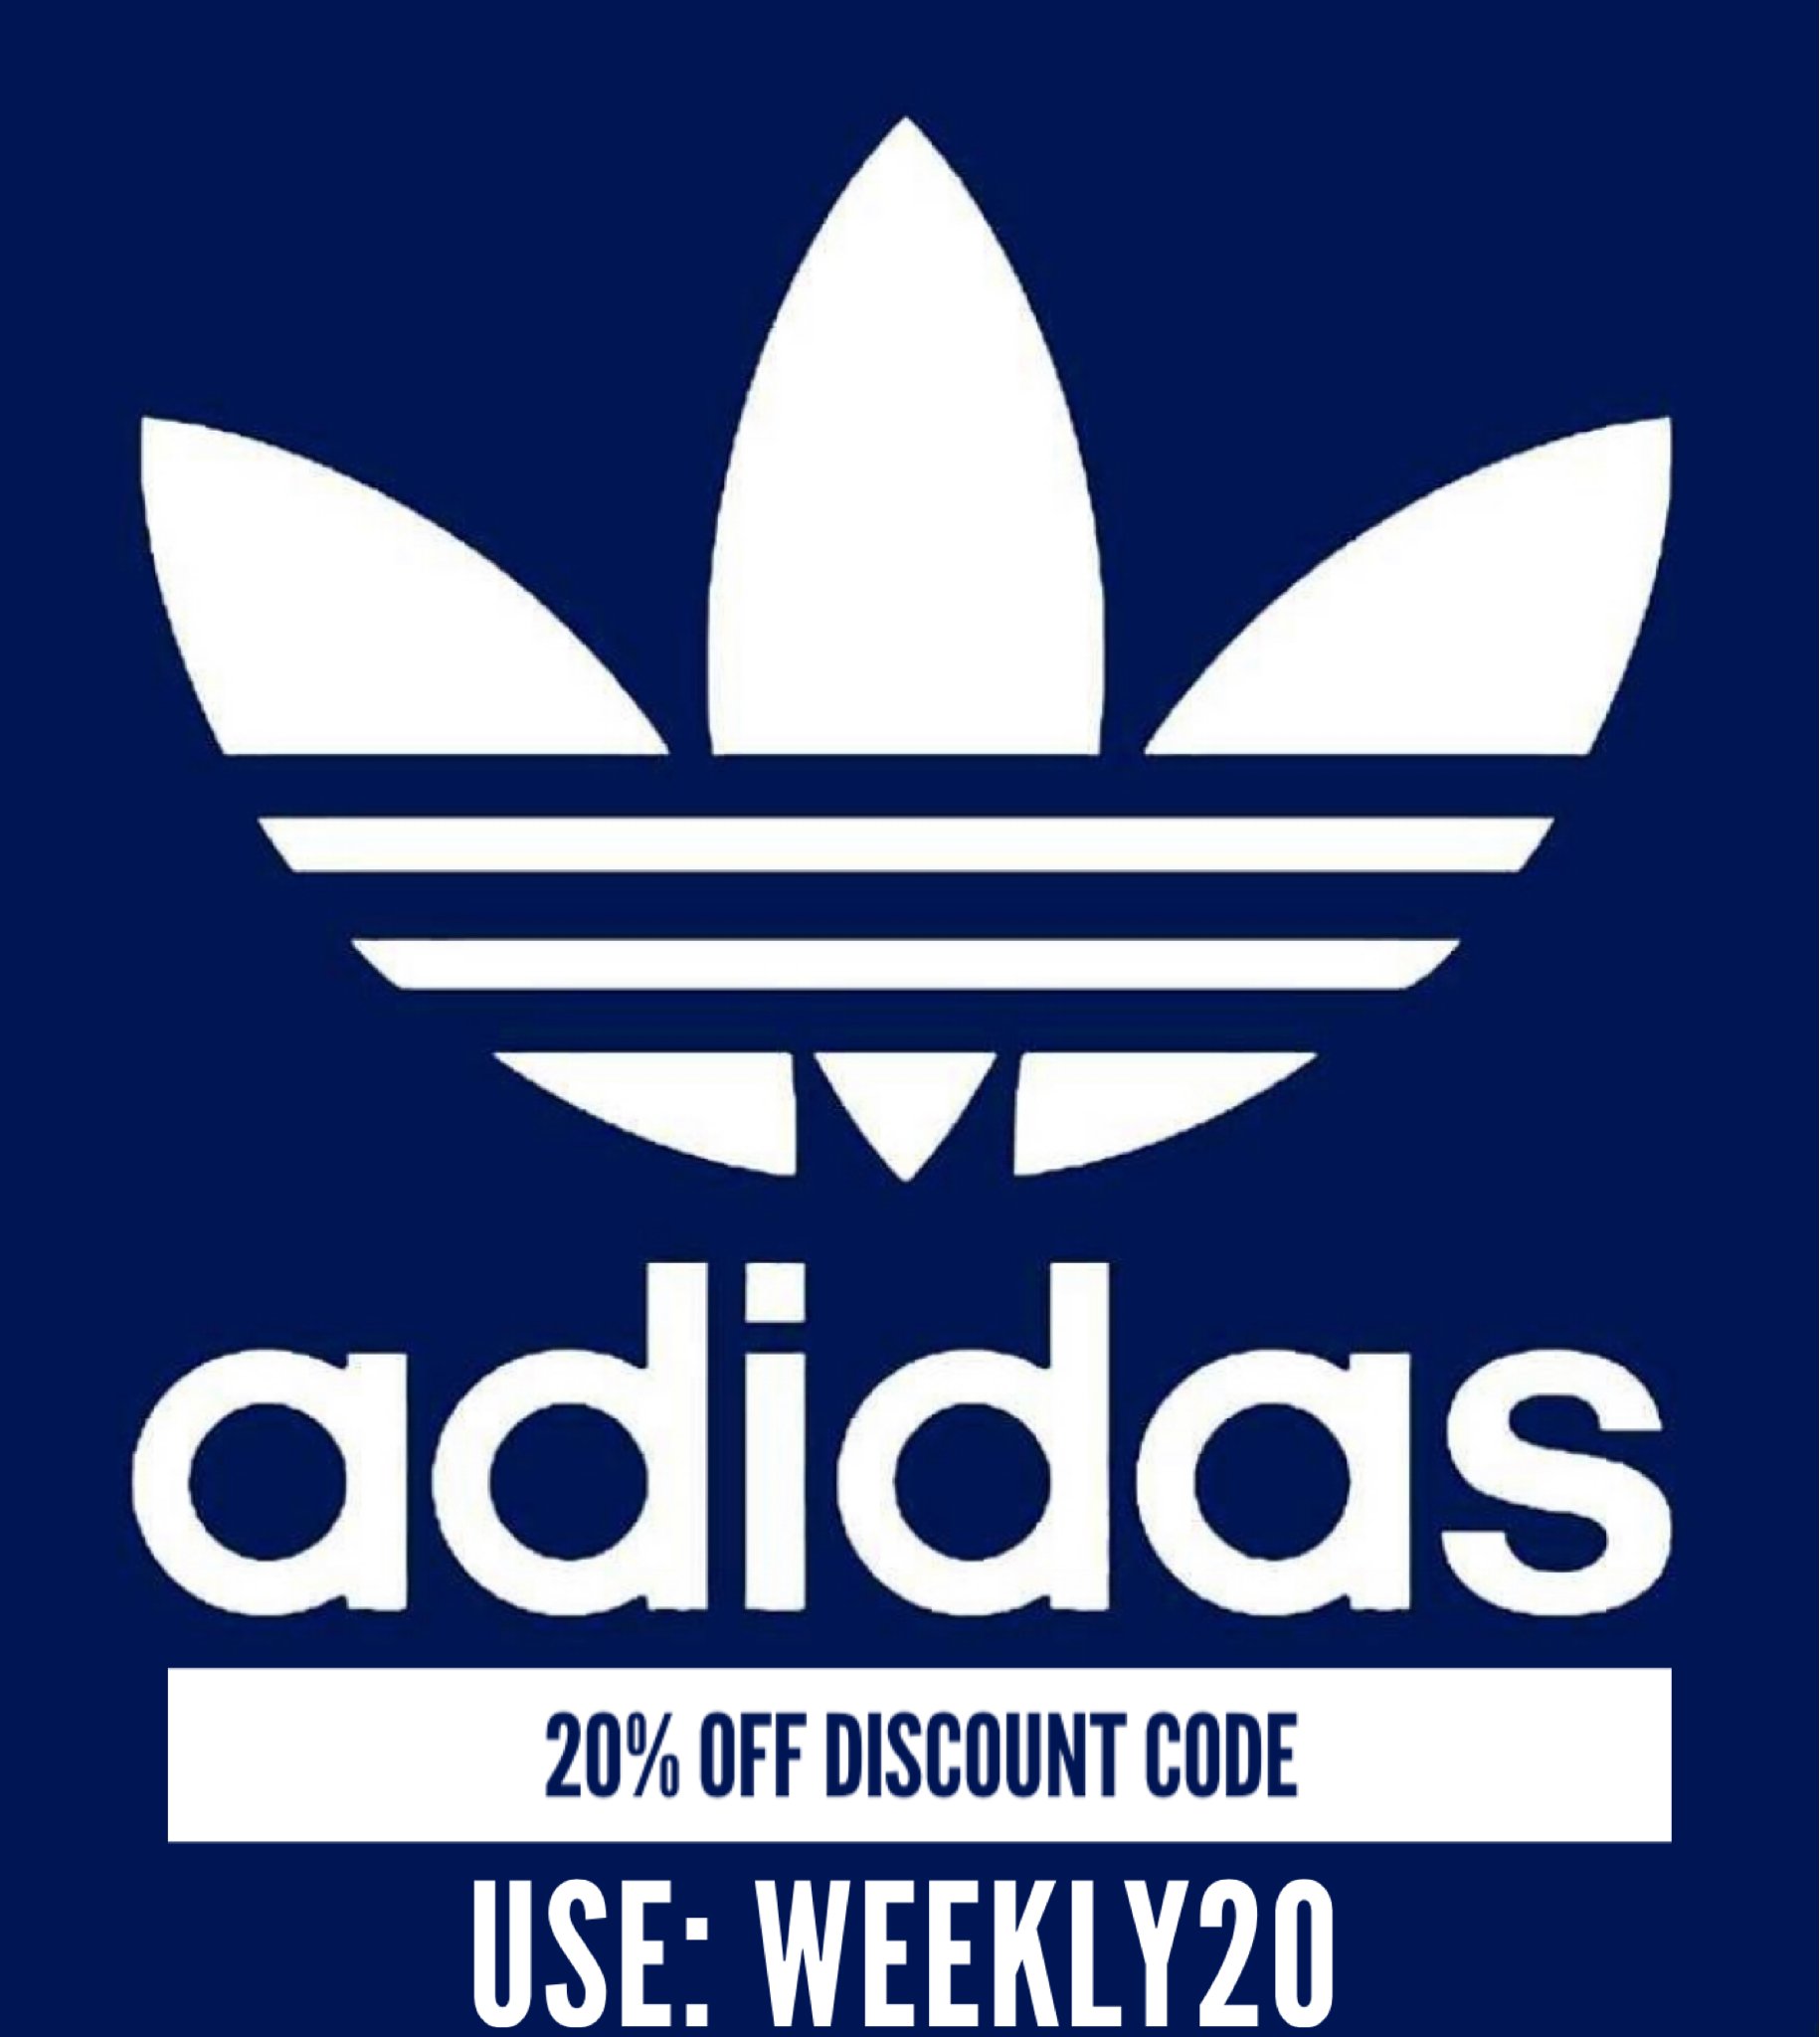 The Casuals Directory on Twitter: 🔥 20% off Adidas 🔥 Claim 20% off adidas at the following link 👇🏻👇🏻 https://t.co/Qe9NcUeZ3L Use discount code: WEEKLY20 at the checkouts. #adidas #adidasoriginals #